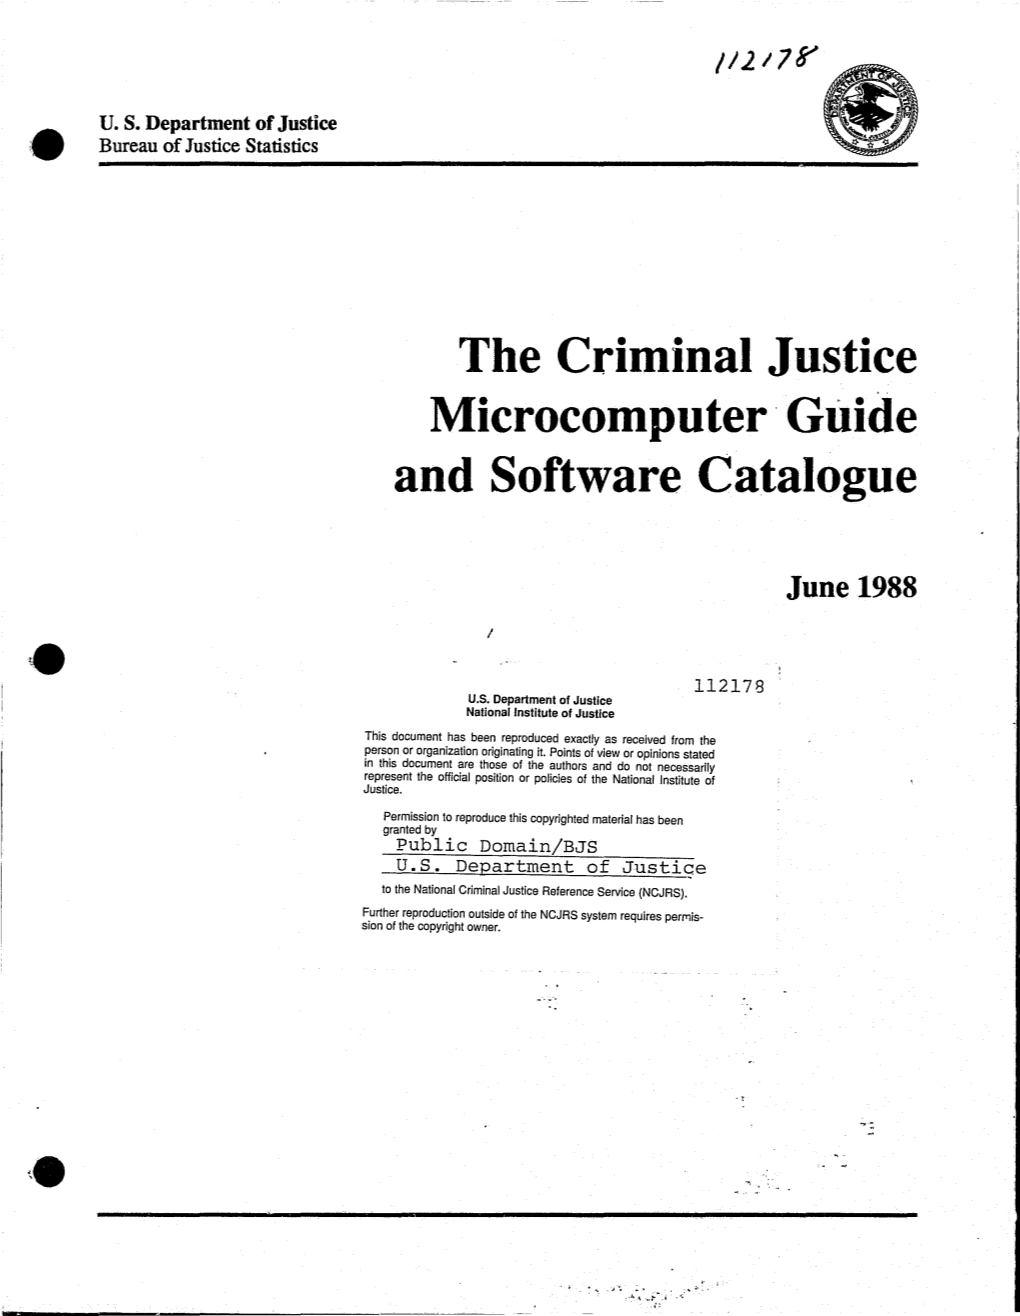 Criminal Justice Microcomputer Guide and Software Catalogue by Voluntarily Providing Information on Criminal Justice Application Software